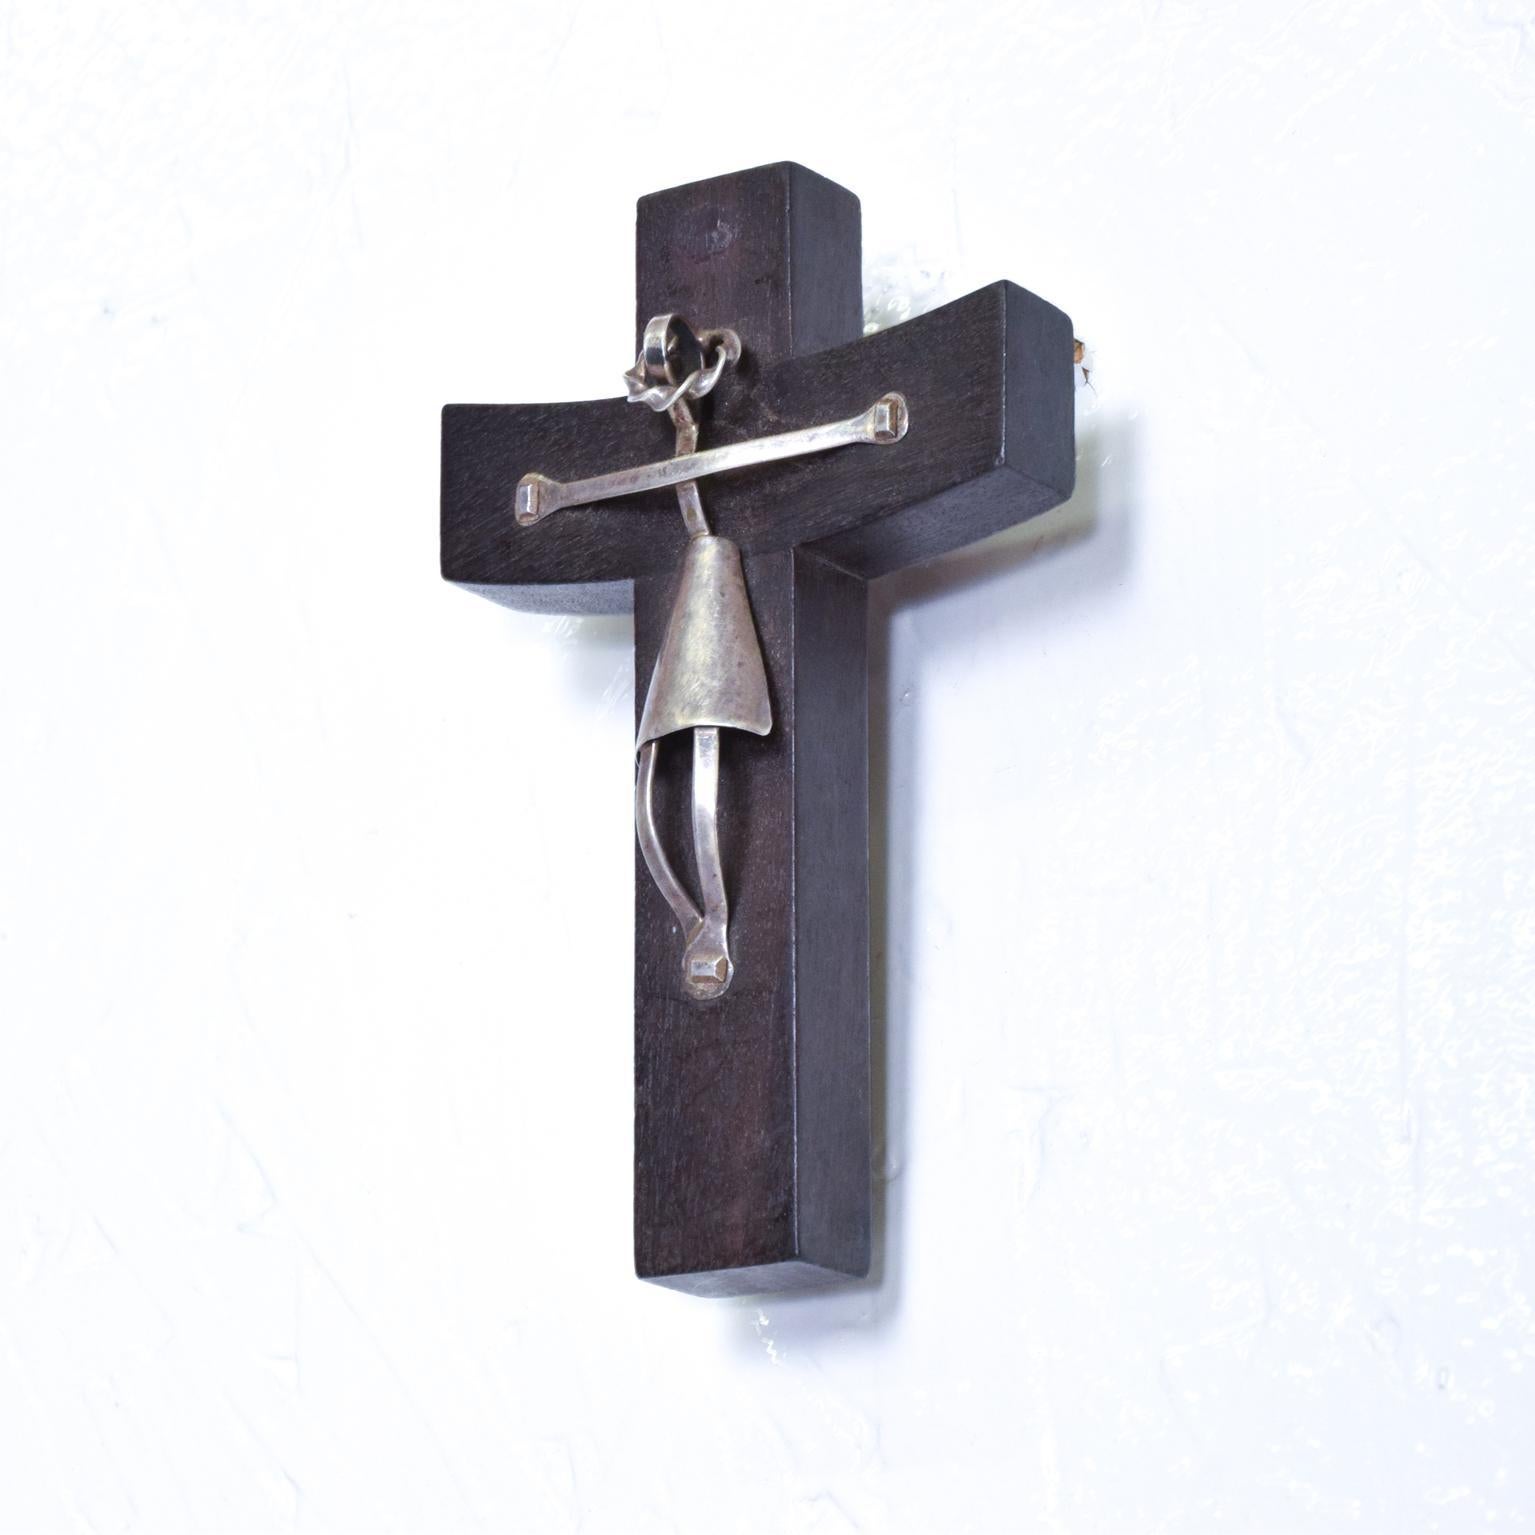 For your consideration, a Mexican modernist cross silver and mahogany. Emaus Attributed. No markings present from the maker. Made in Mexico, circa 1970s. Dimensions: 4 3/4